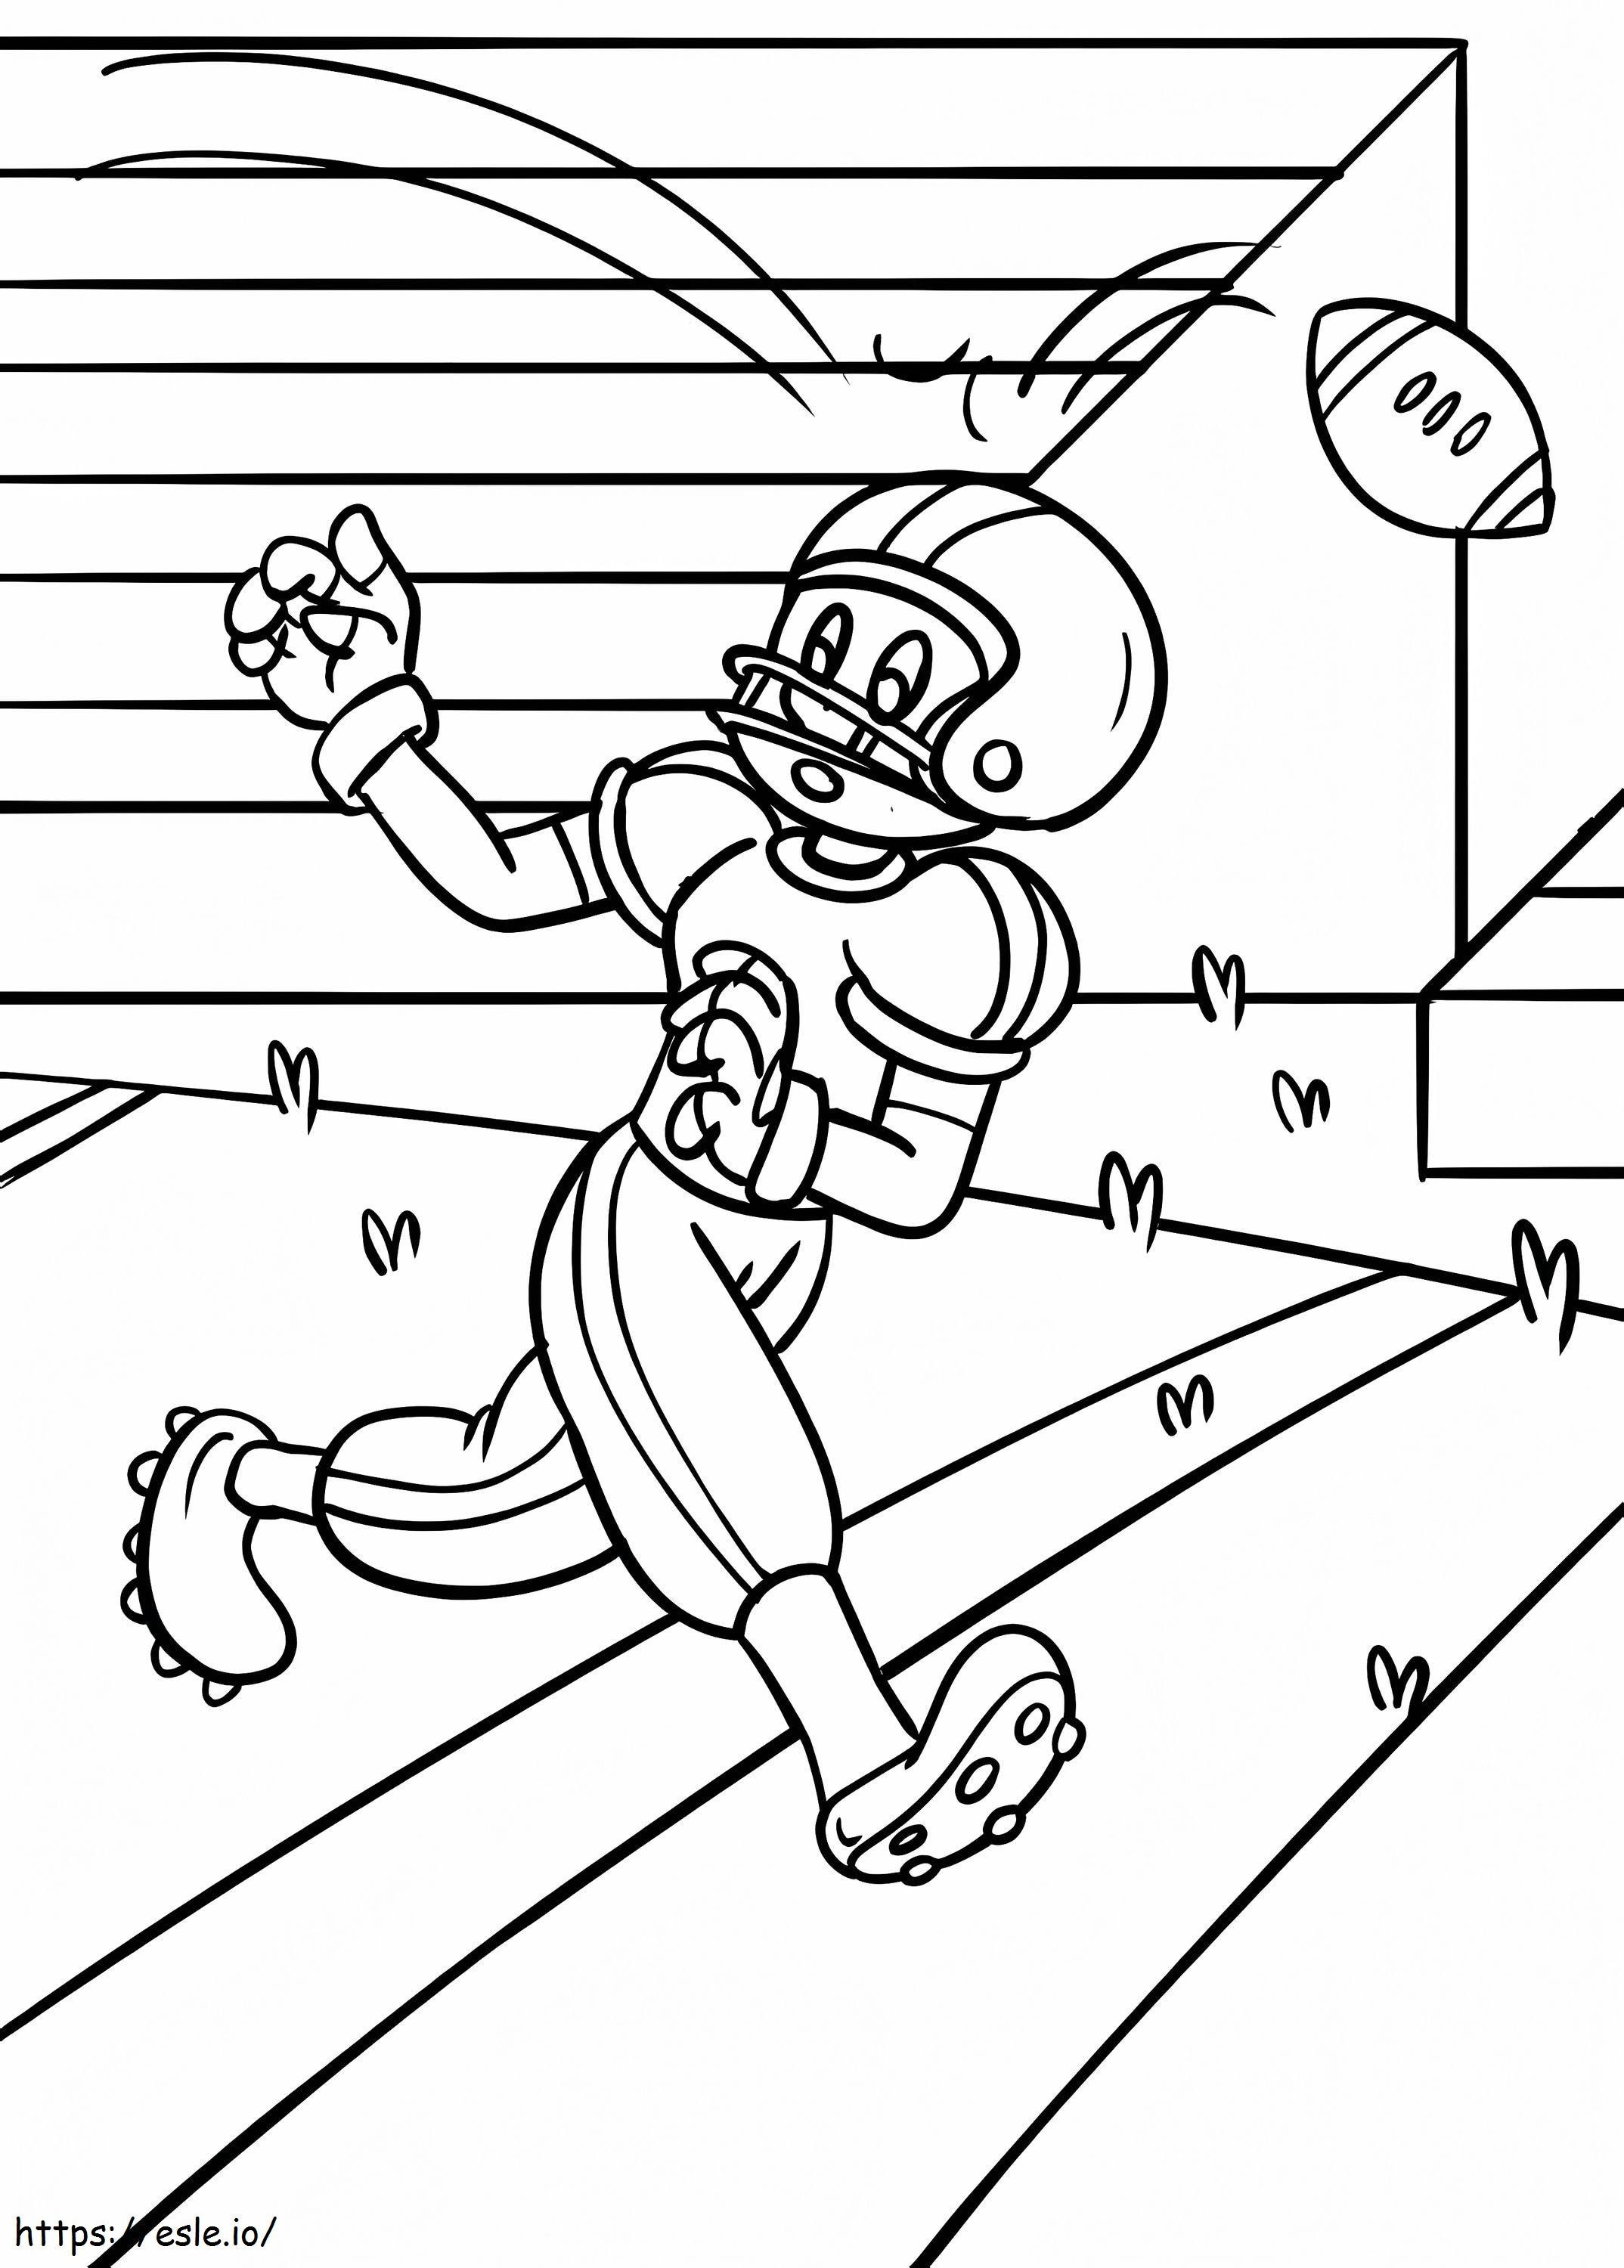 Cartoon Soccer Player coloring page